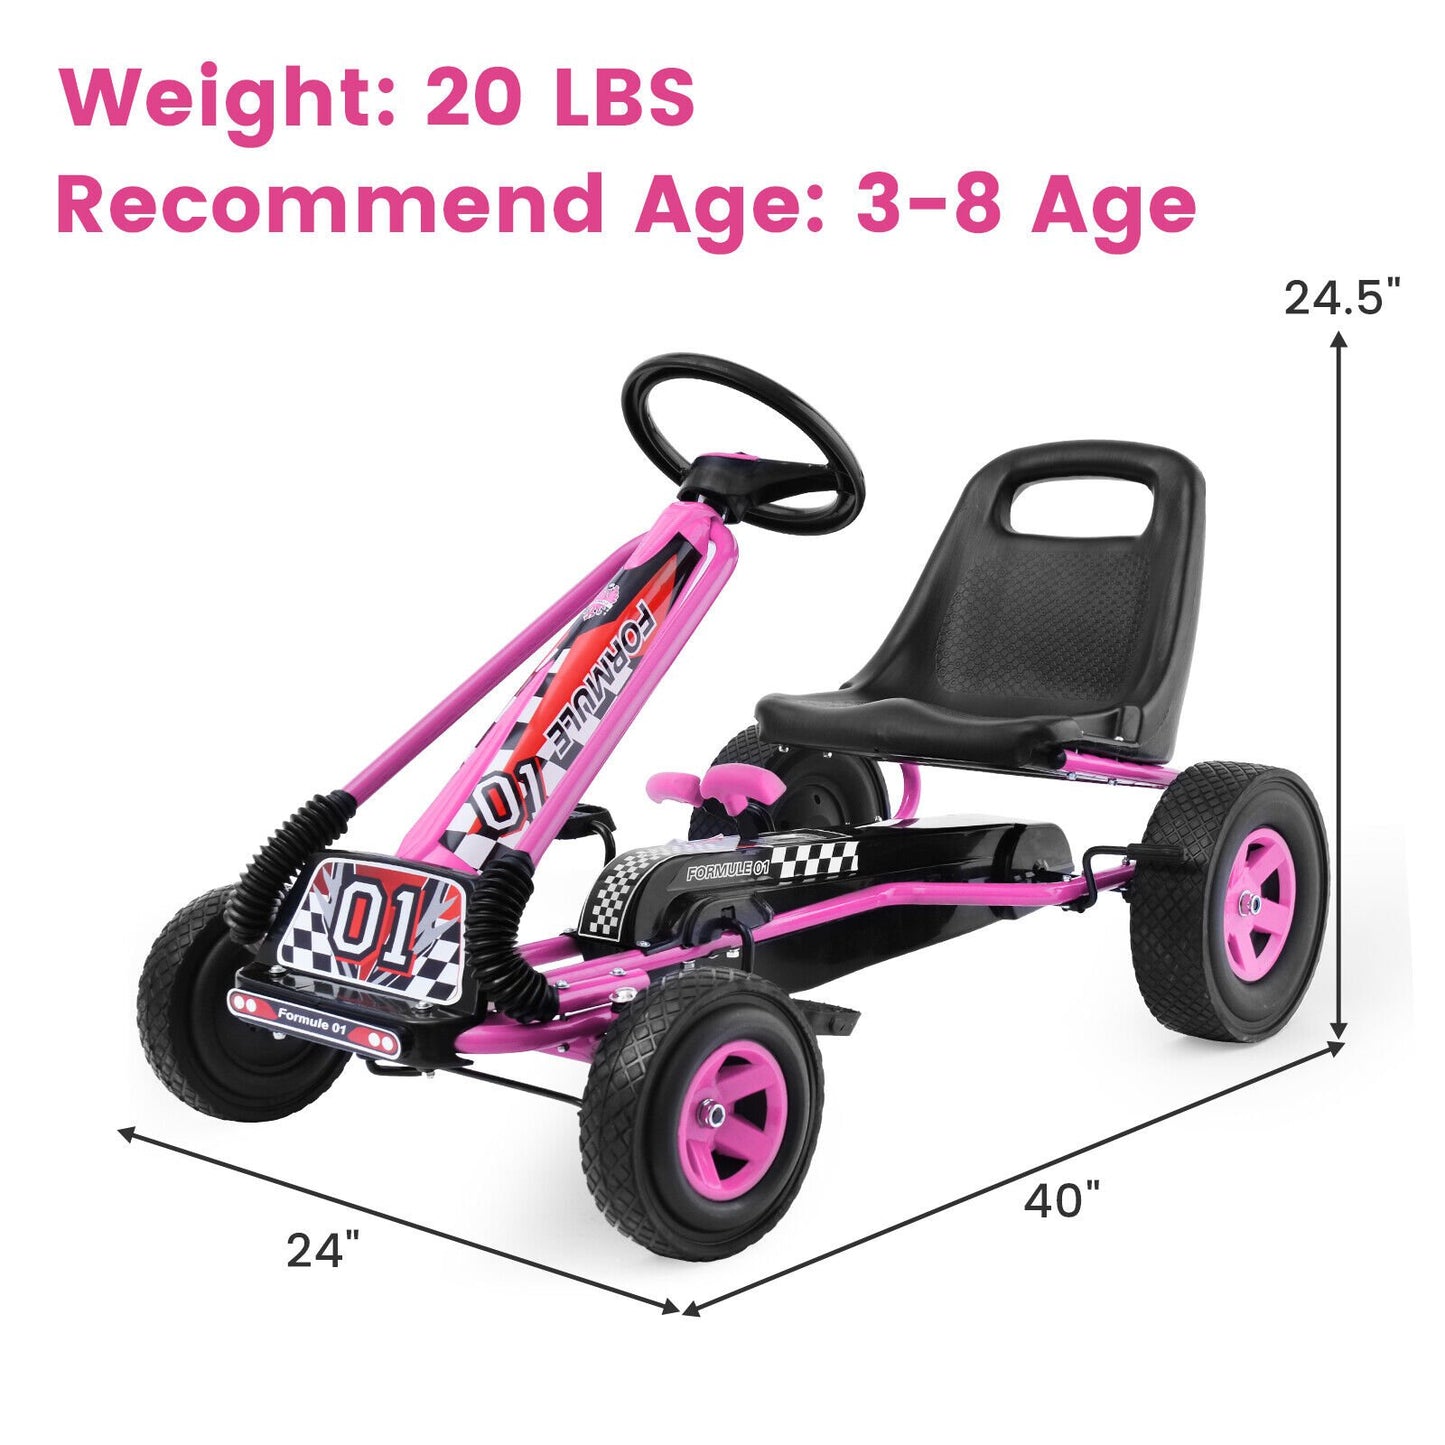 4 Wheels Kids Ride On Pedal Powered Bike Go Kart Racer Car Outdoor Play Toy, Pink